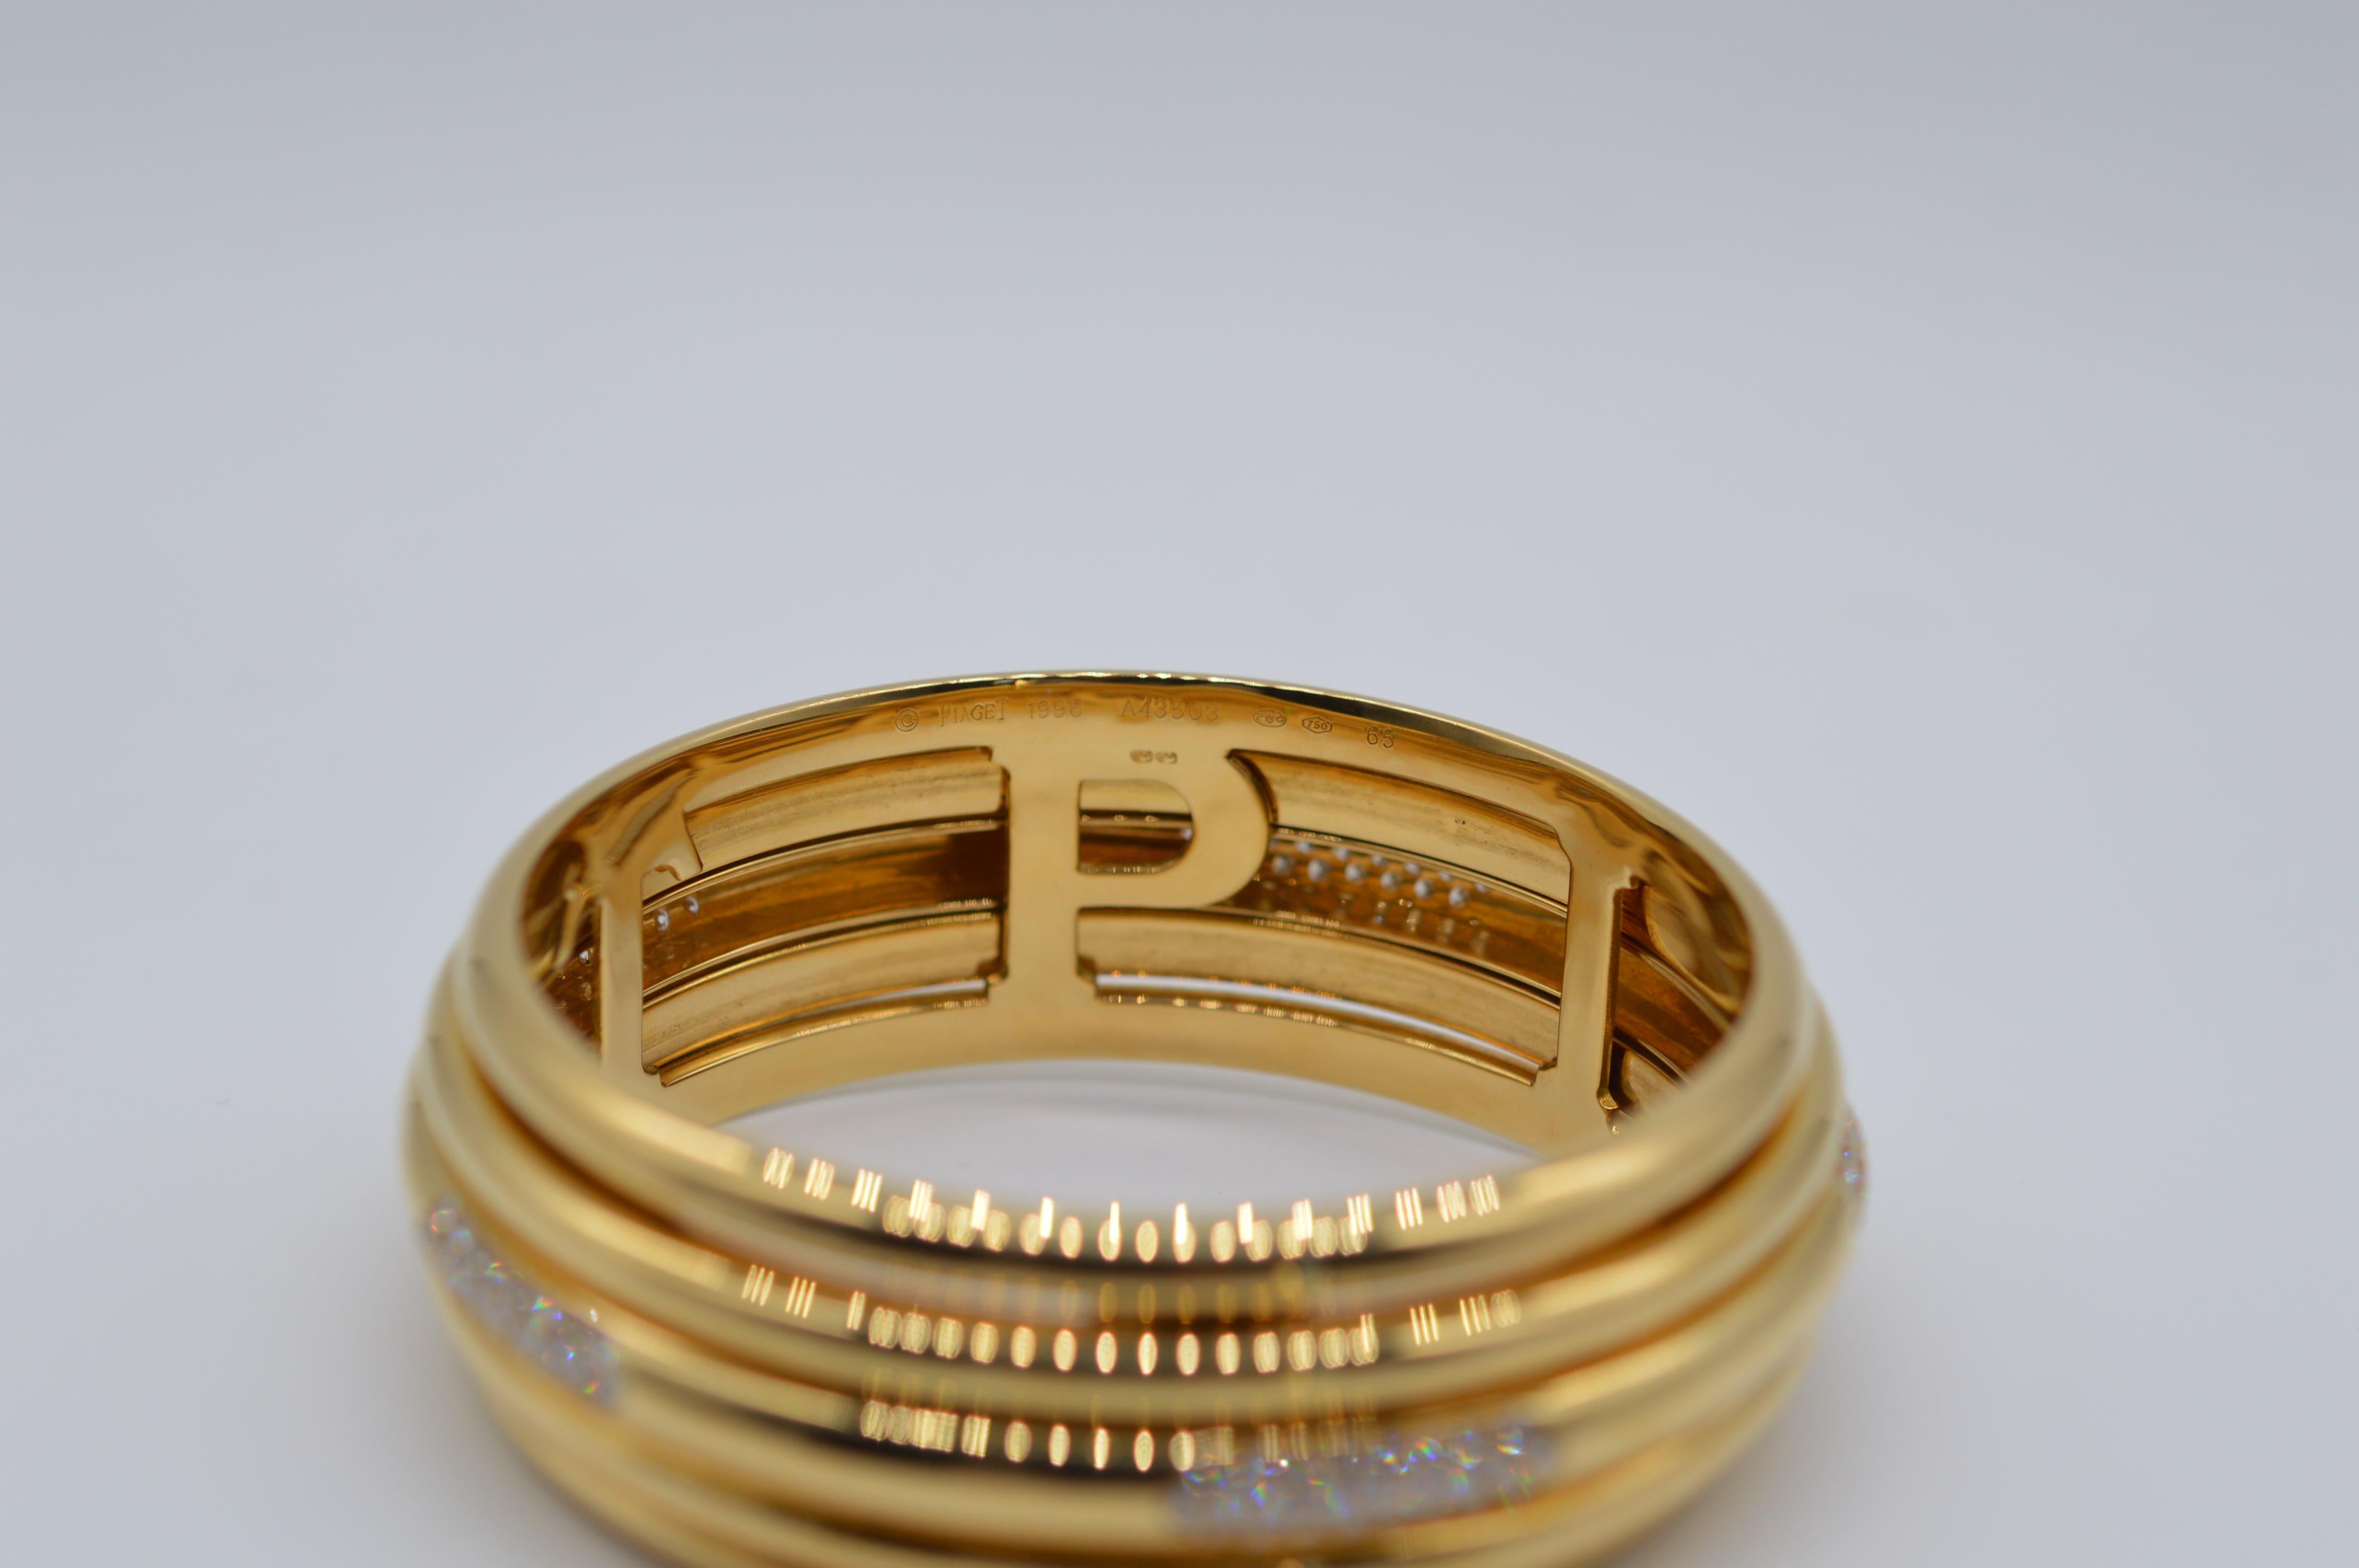 Piaget Possession Spinning Bangle Unworn
Size 65
18K Yellow Gold
Spinning bangle
Weight 124.2 grams
Diamonds Setting
Set with 125 Diamonds for a total weight of 4.37 carats
Vintage unworn
From 1996
